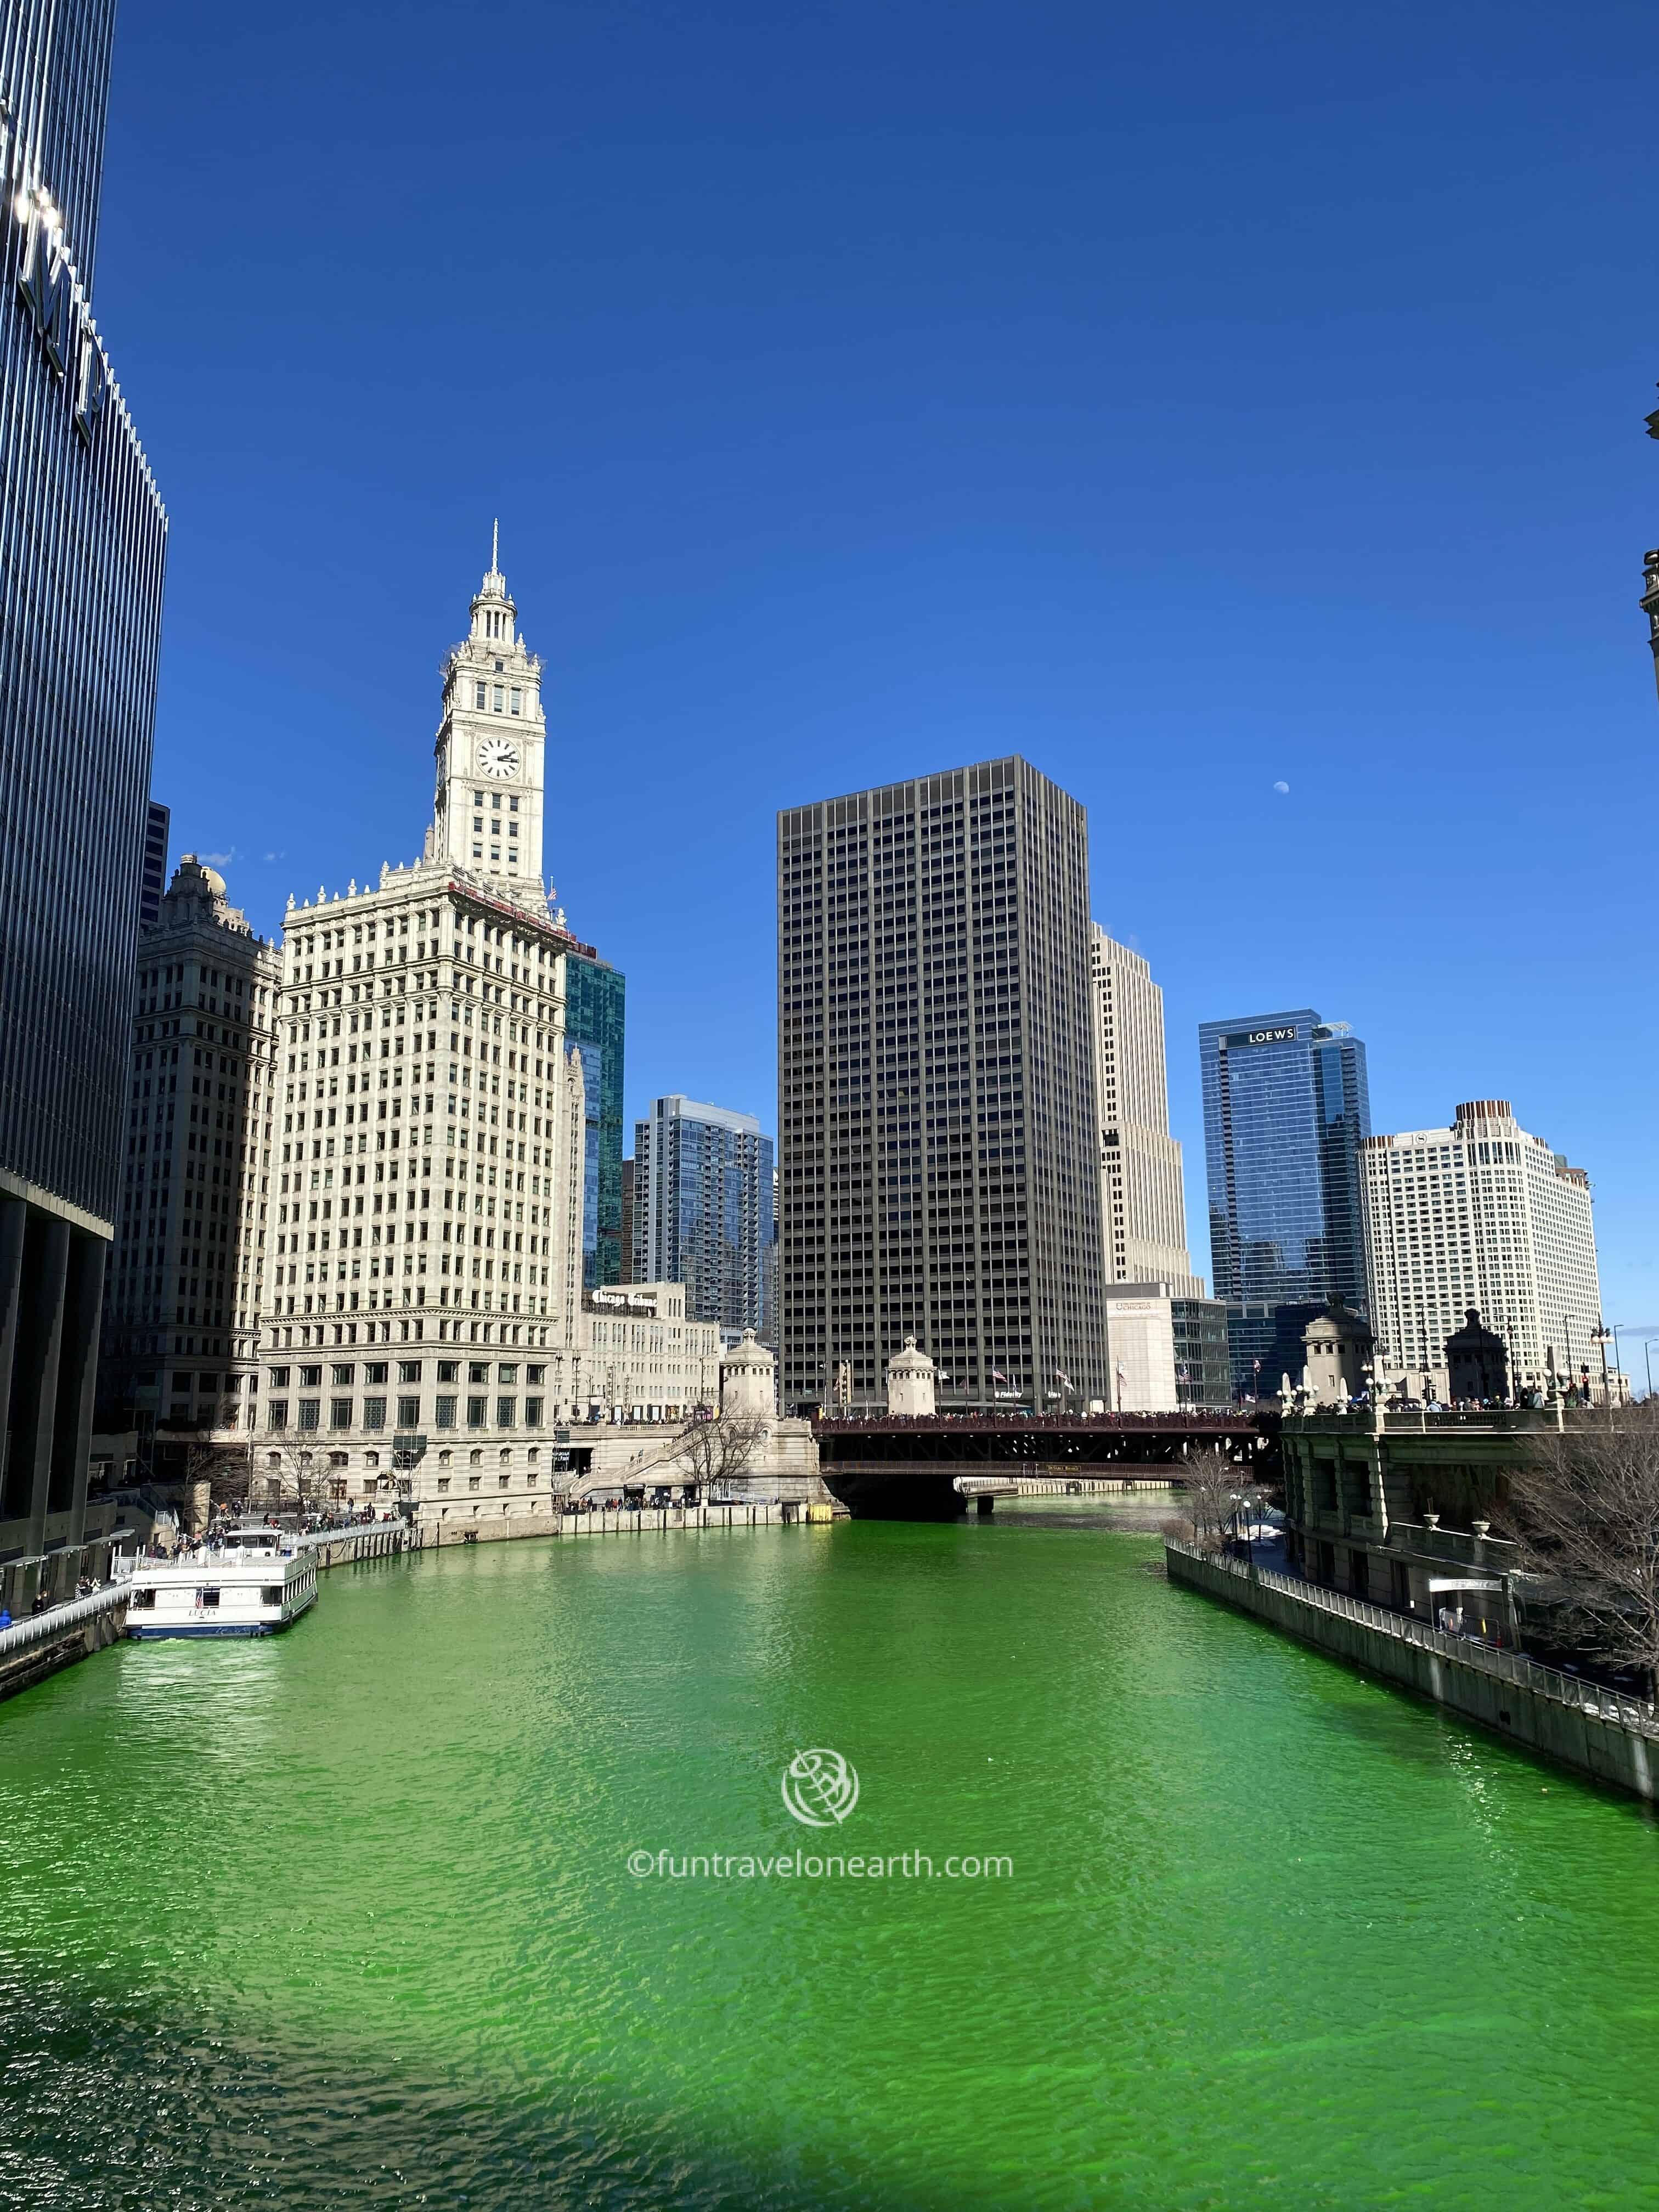 CHICAGO ST. PATRICK'S DAY, RIVER DYEING